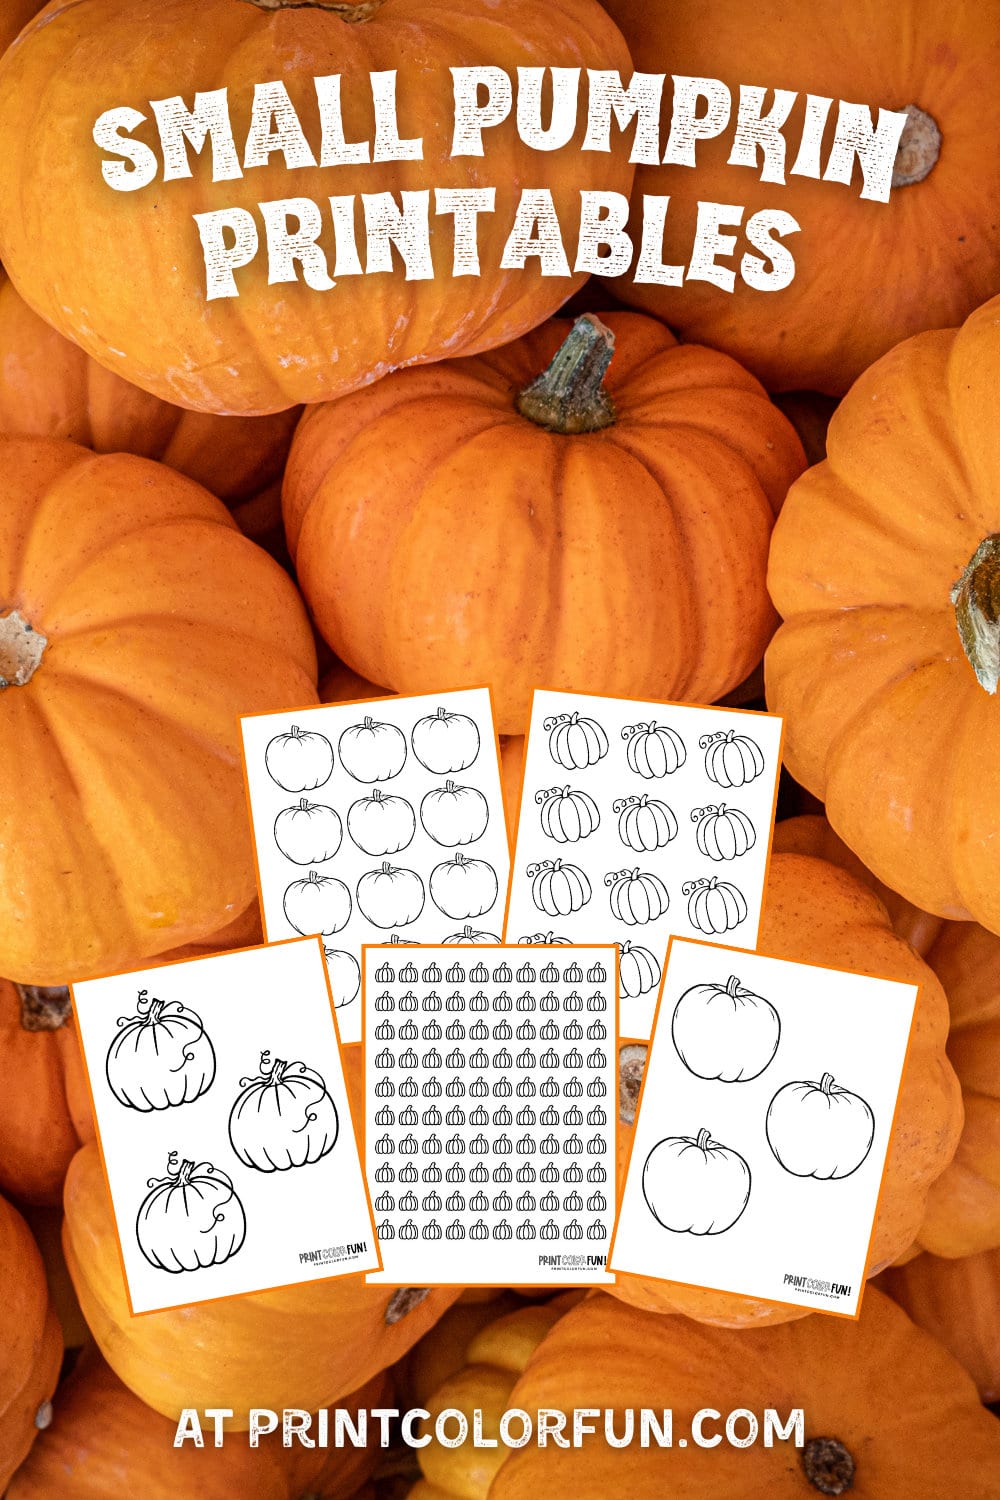 Small pumpkin printables to cut, color & craft for autumn fun in several  tiny sizes, at